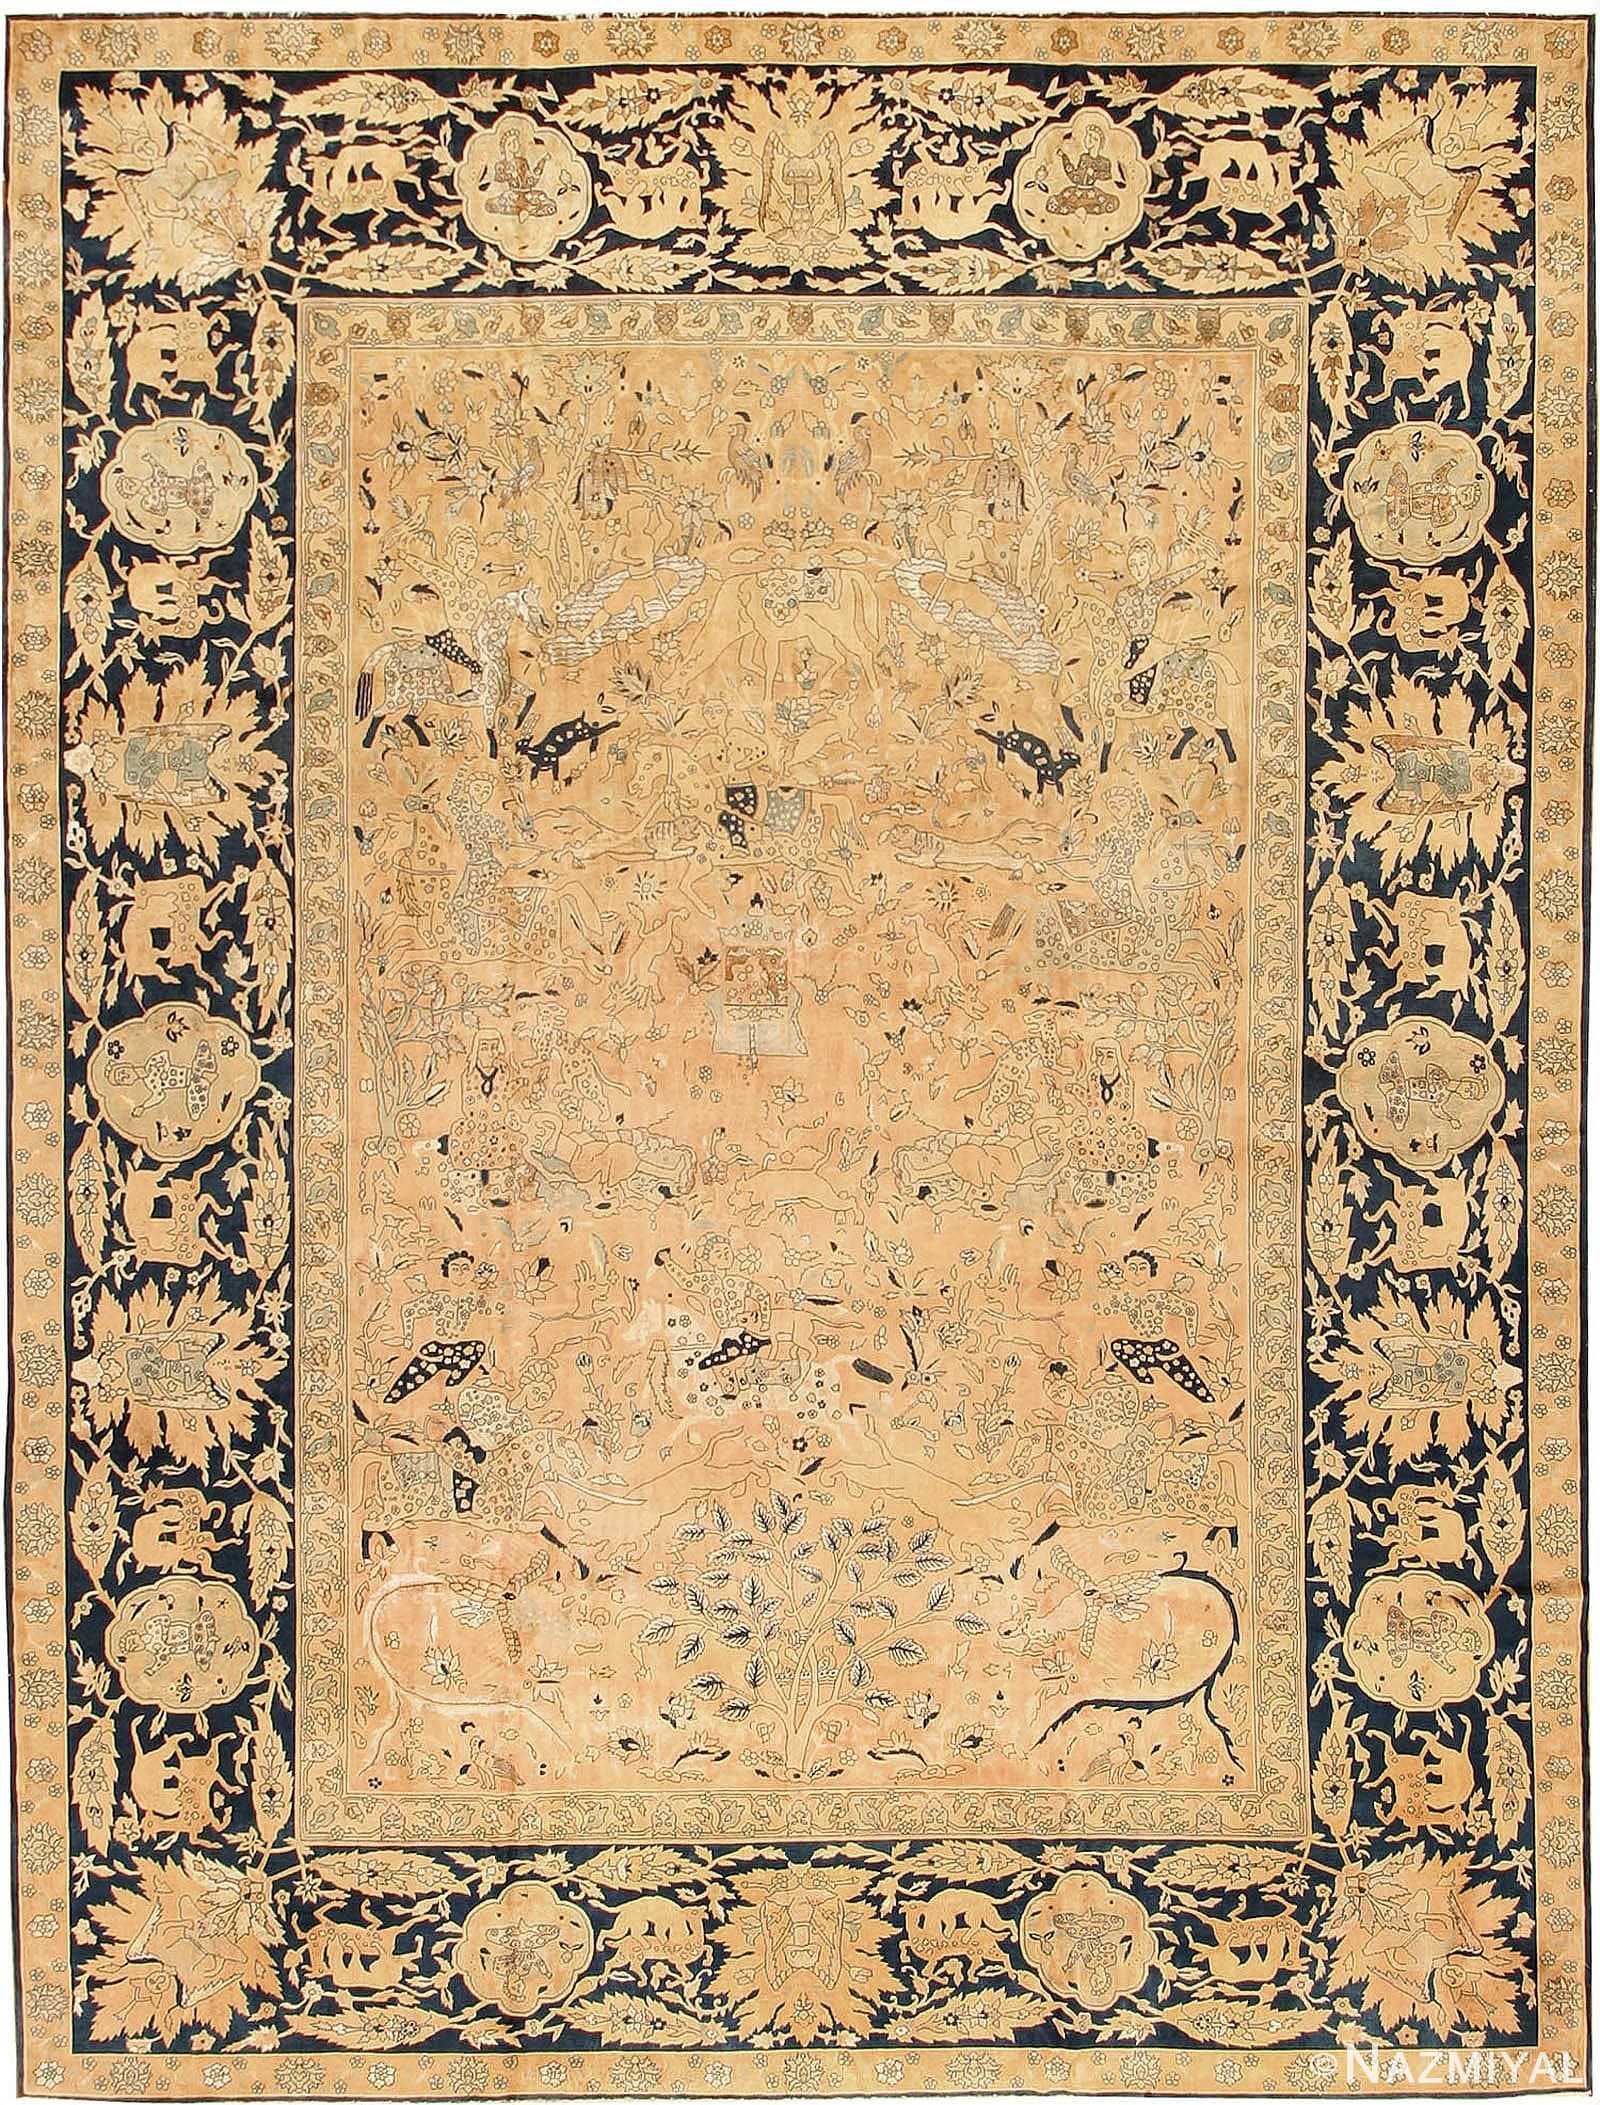 Pictorial Rugs   Buy Antique Scenic and Figurative Pictorial Carpets